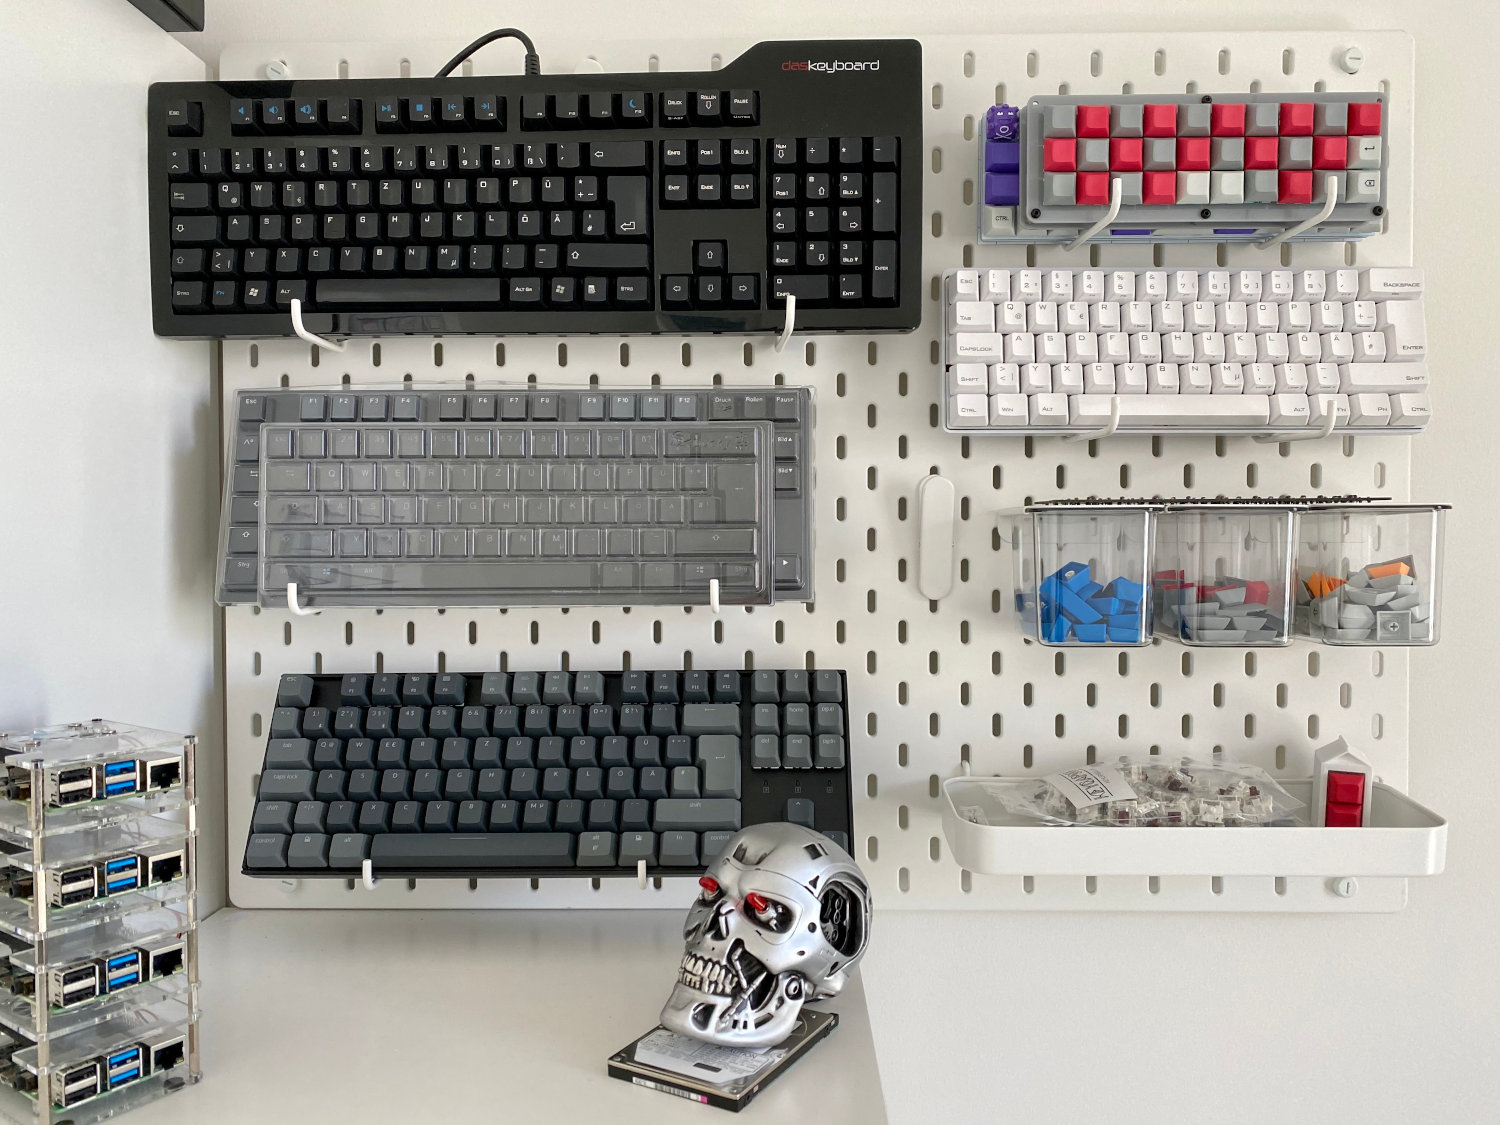 Keyboard collection